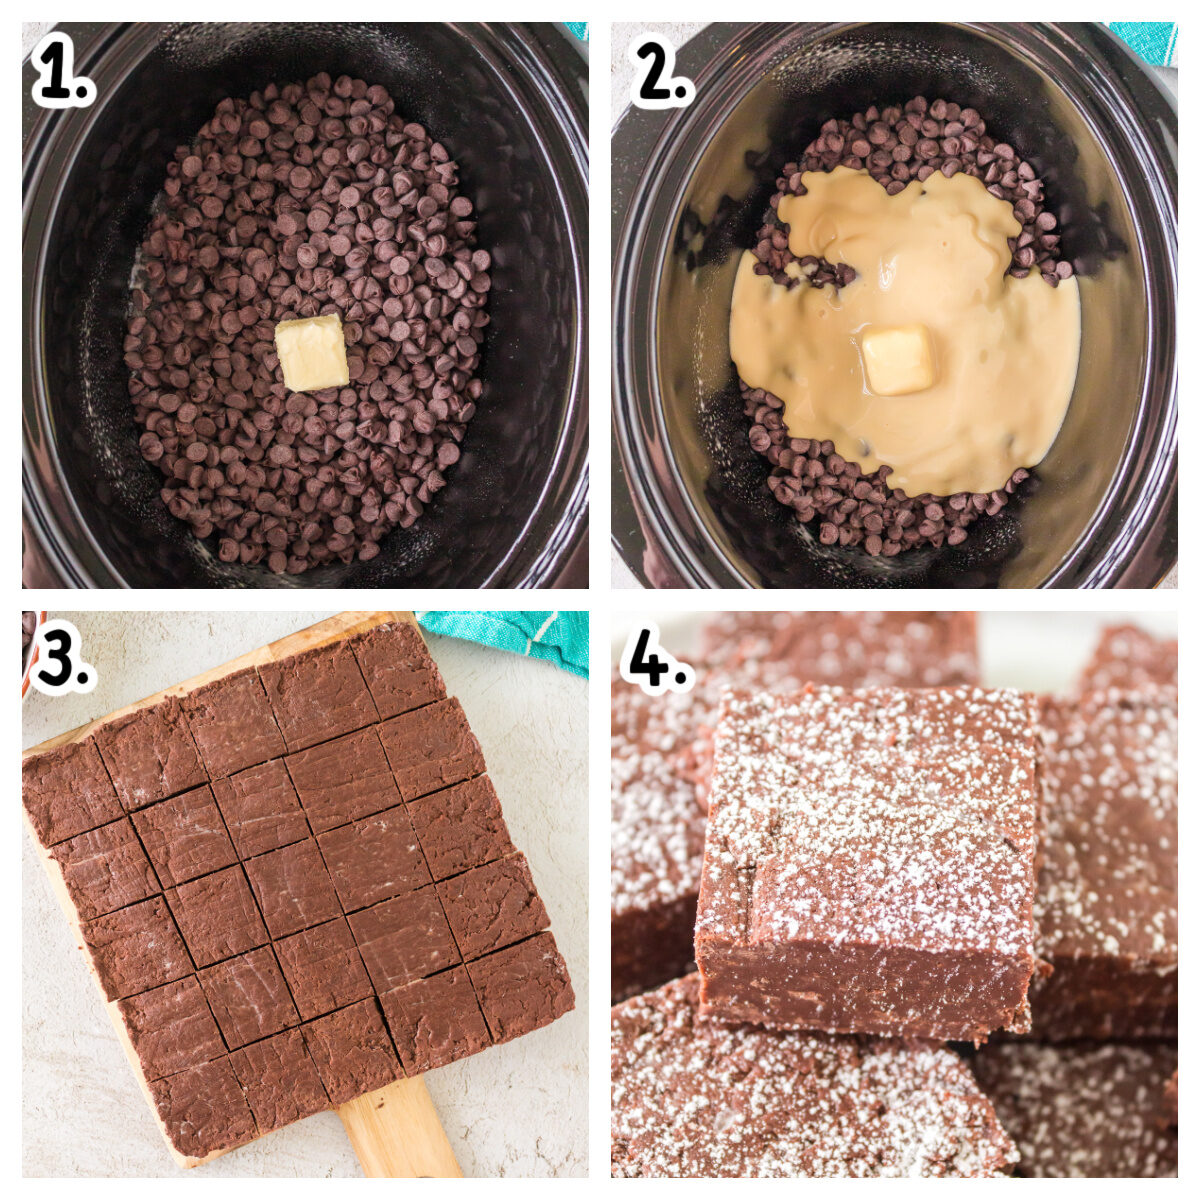 4 images showing how to make fudge in a slow cooker.